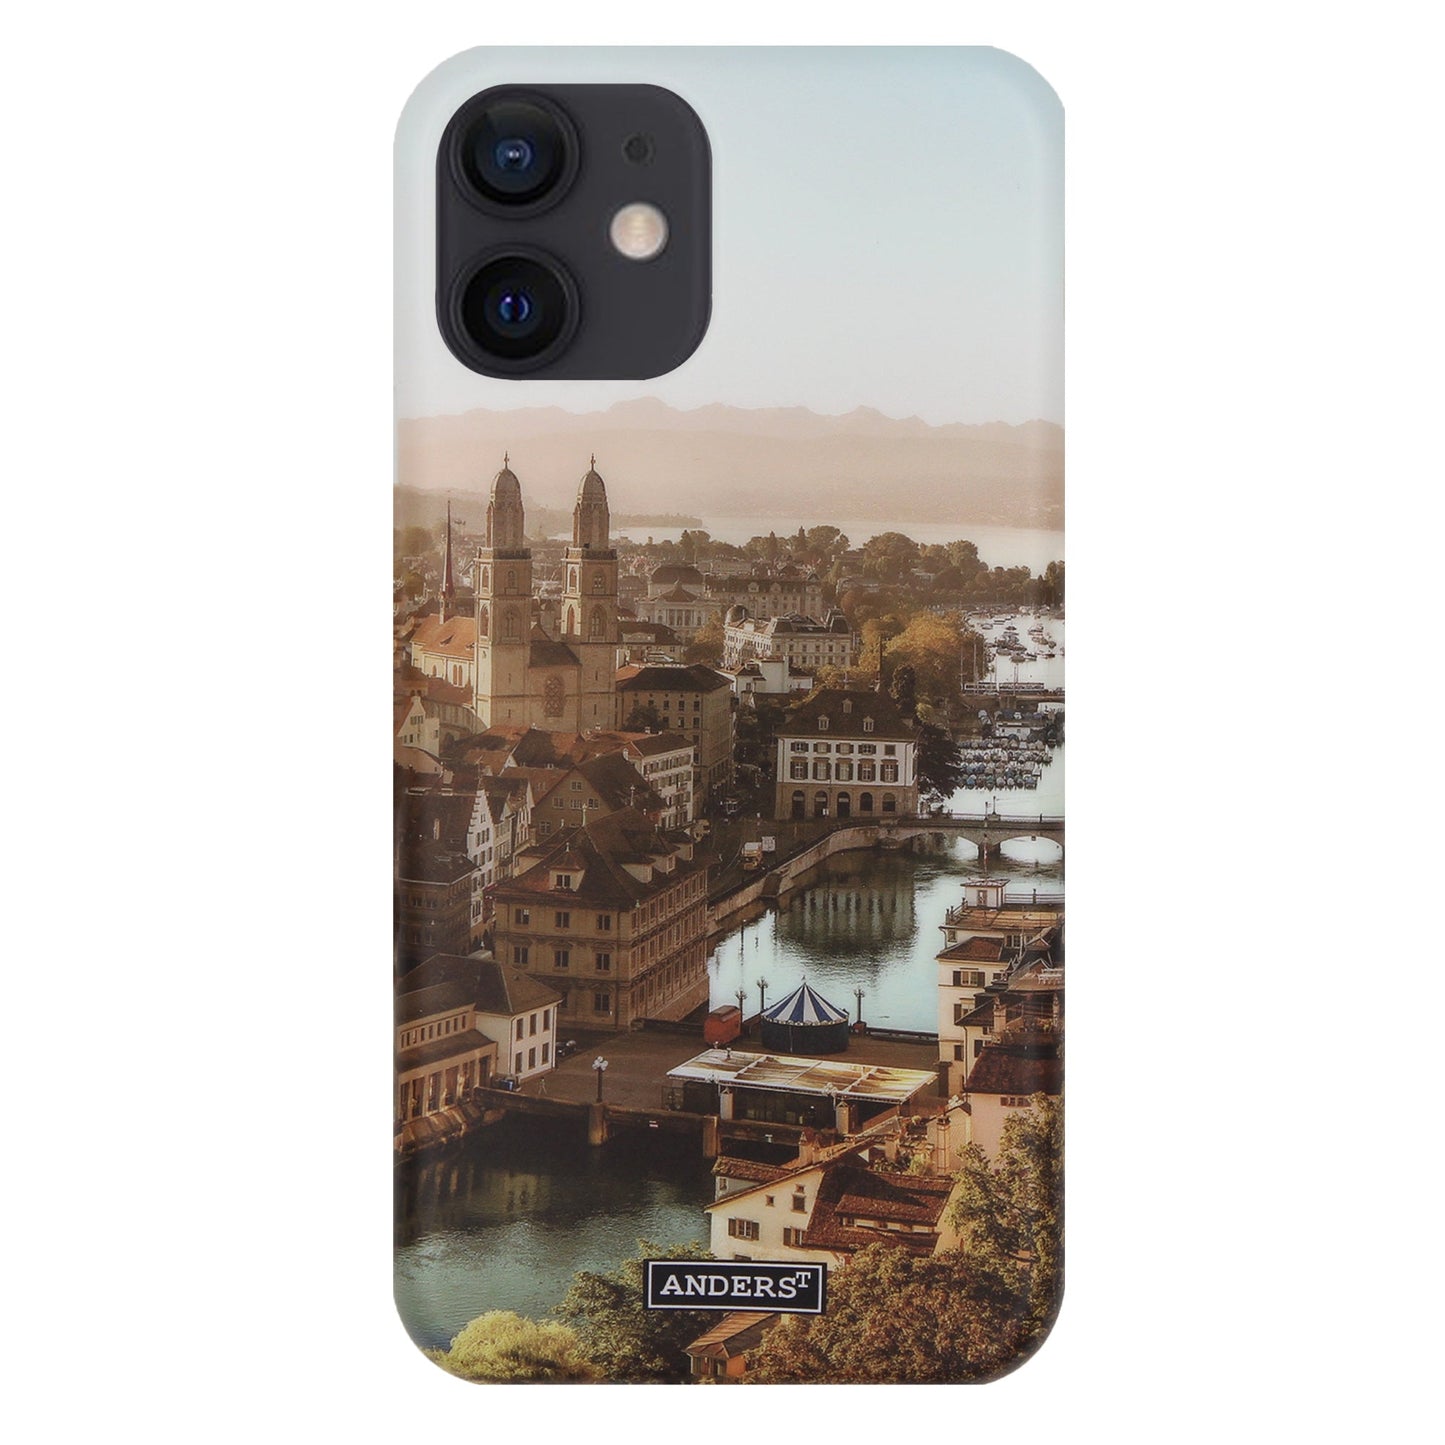 Zurich City from Above 360° Case for iPhone 12 Mini